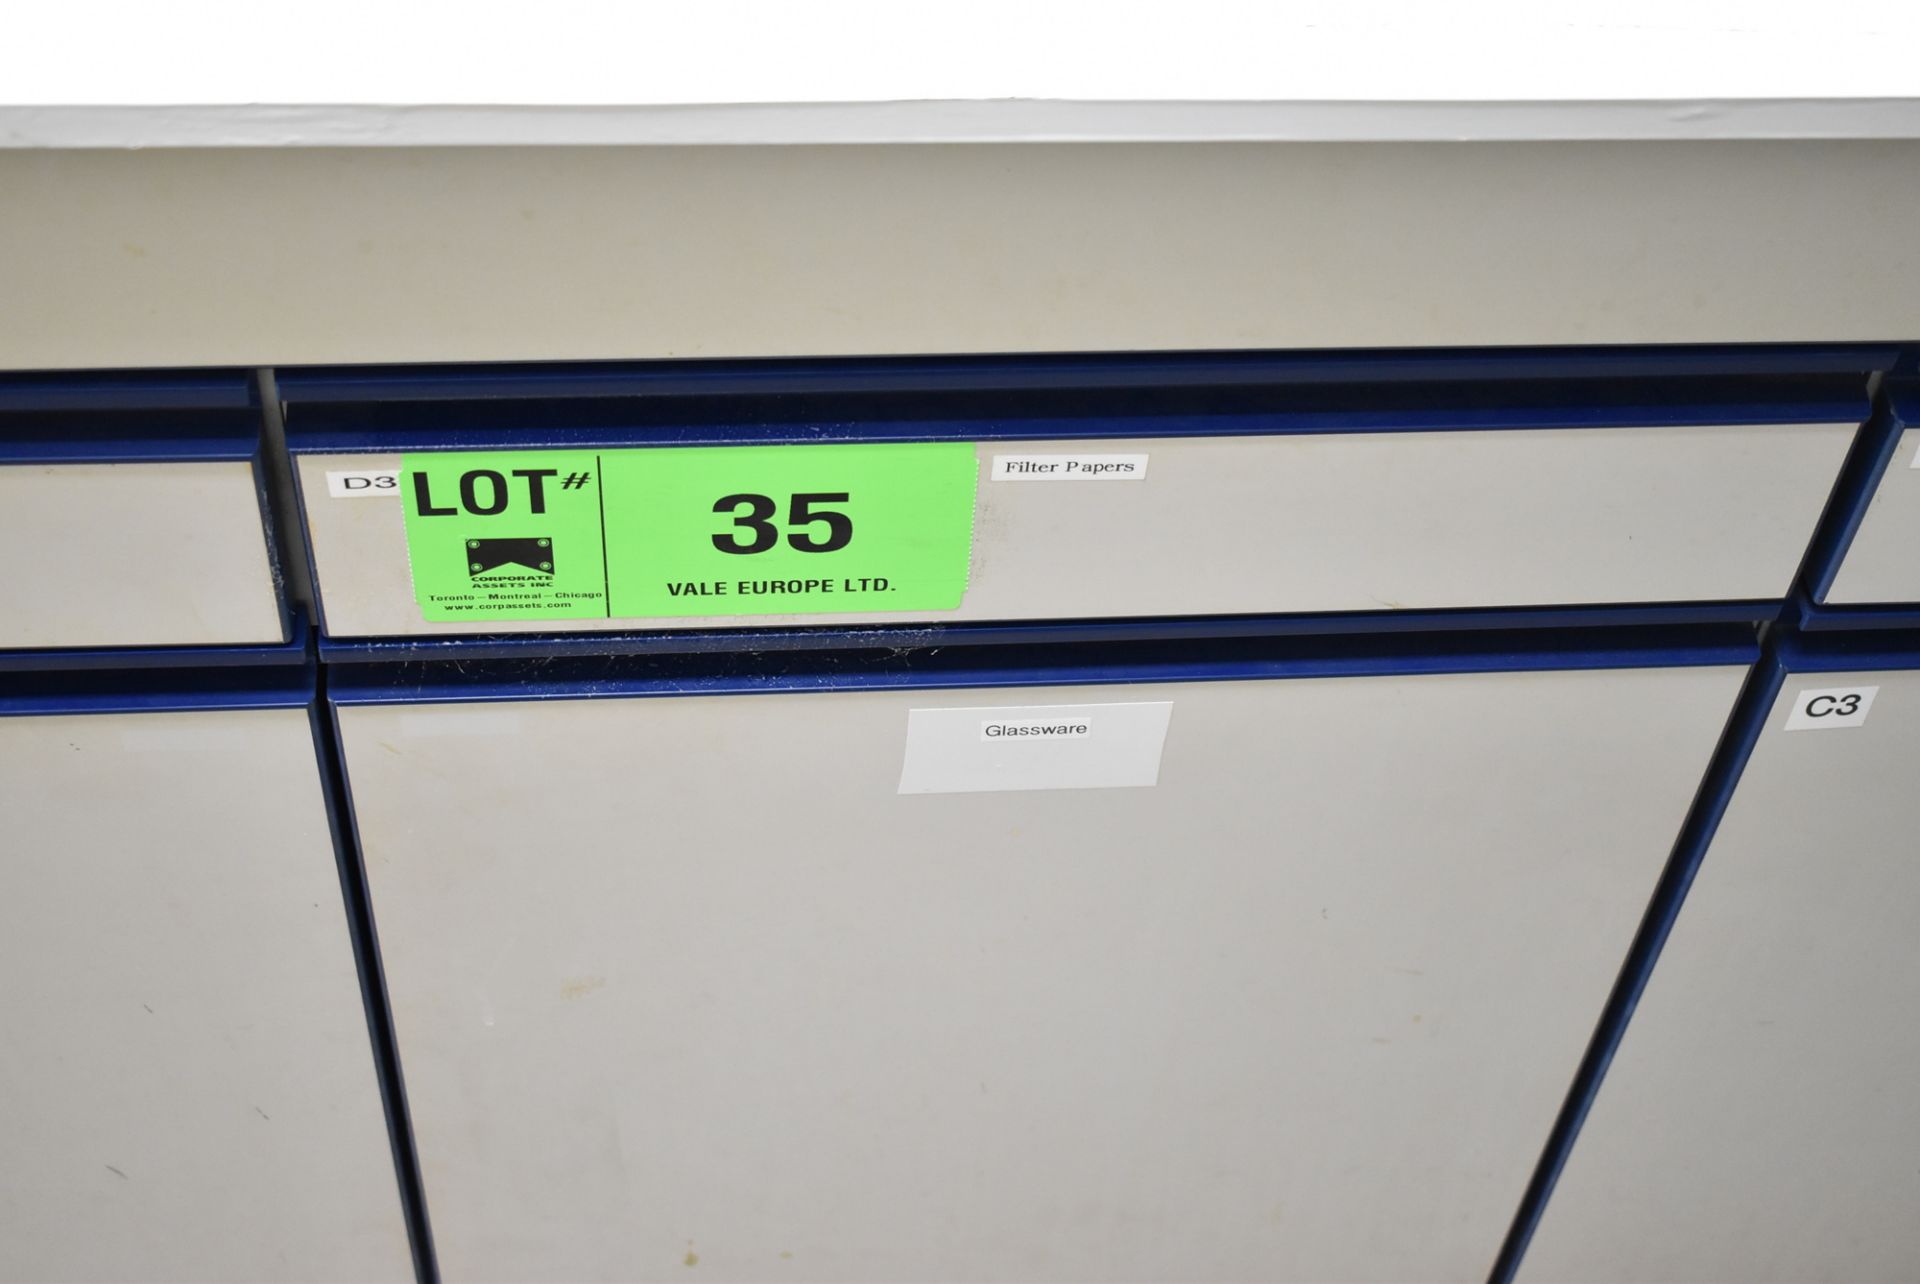 5 SECTION LAB STORAGE CABINETS WITH CONTENTS - GLASSWARE, PIPETTES, ACCESSORIES (DELAYED